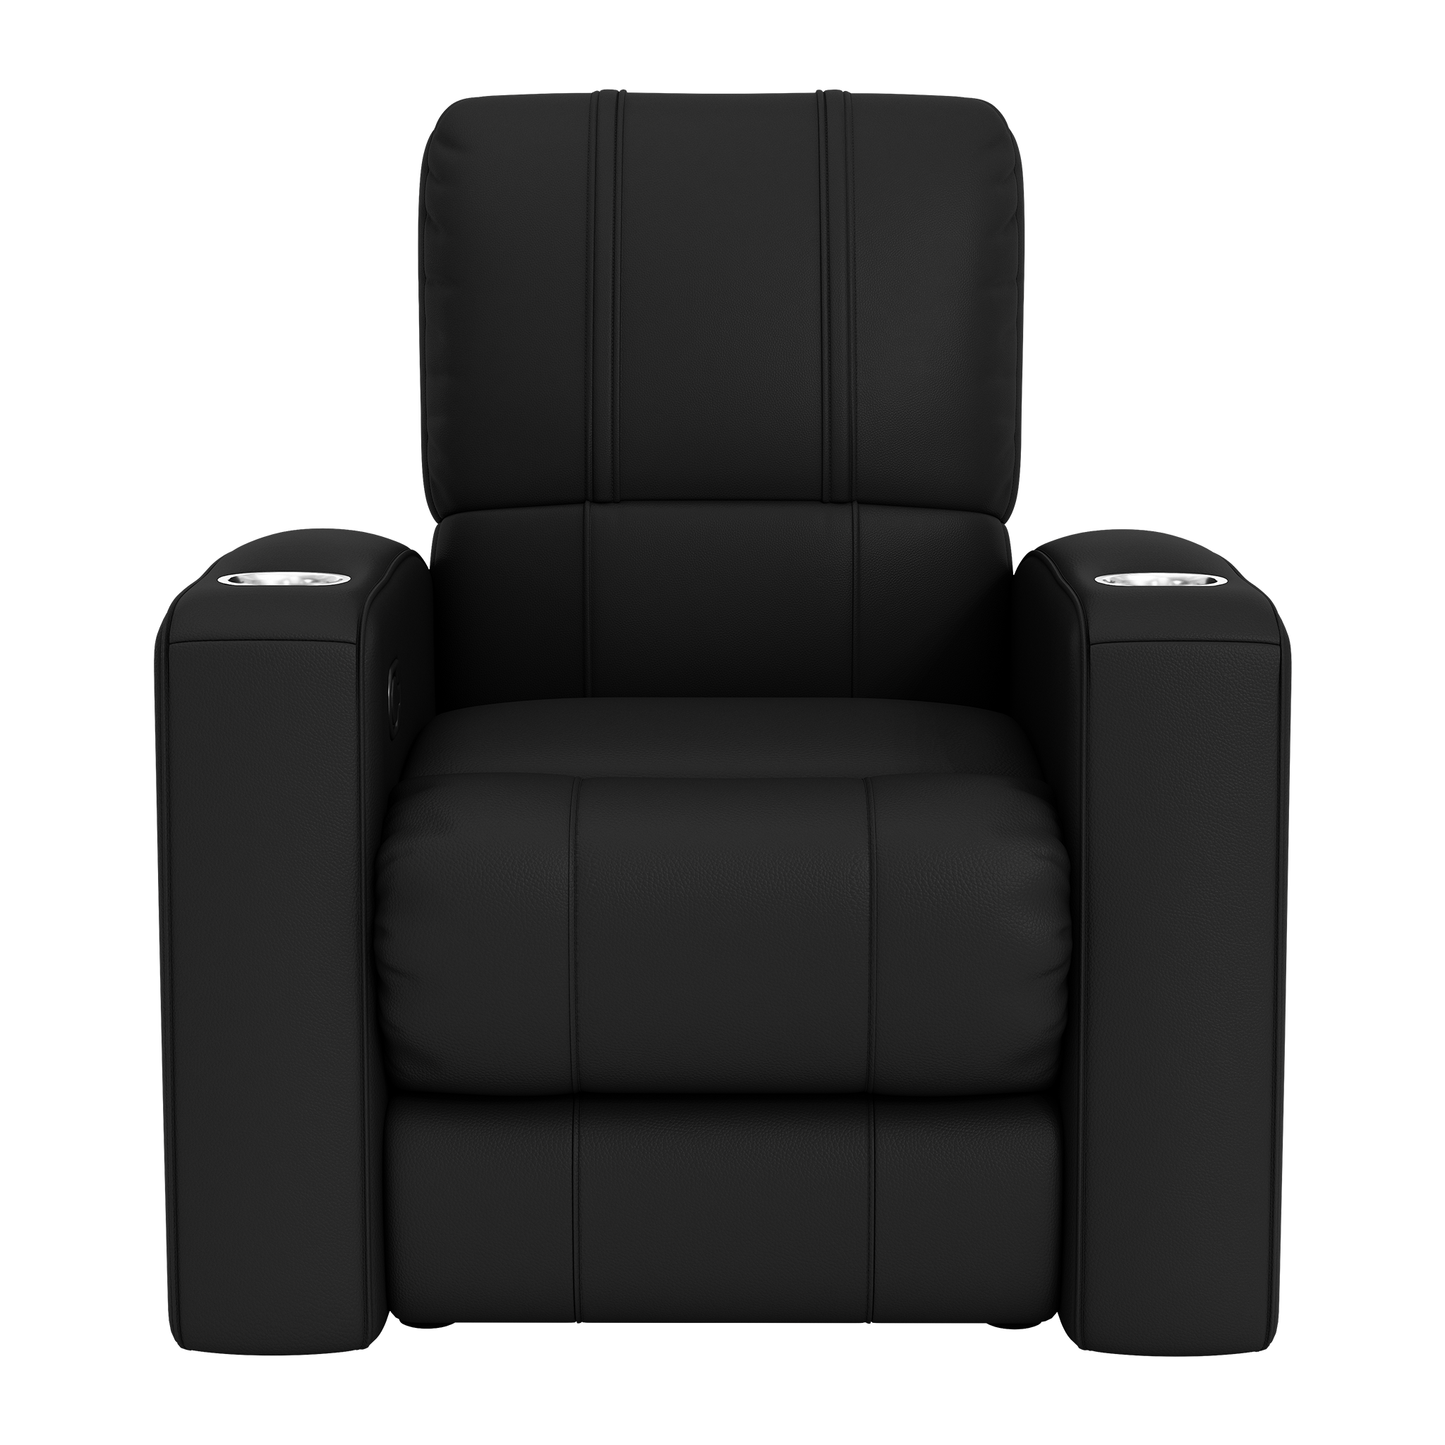 Relax Home Theater Recliner with Marlin Logo